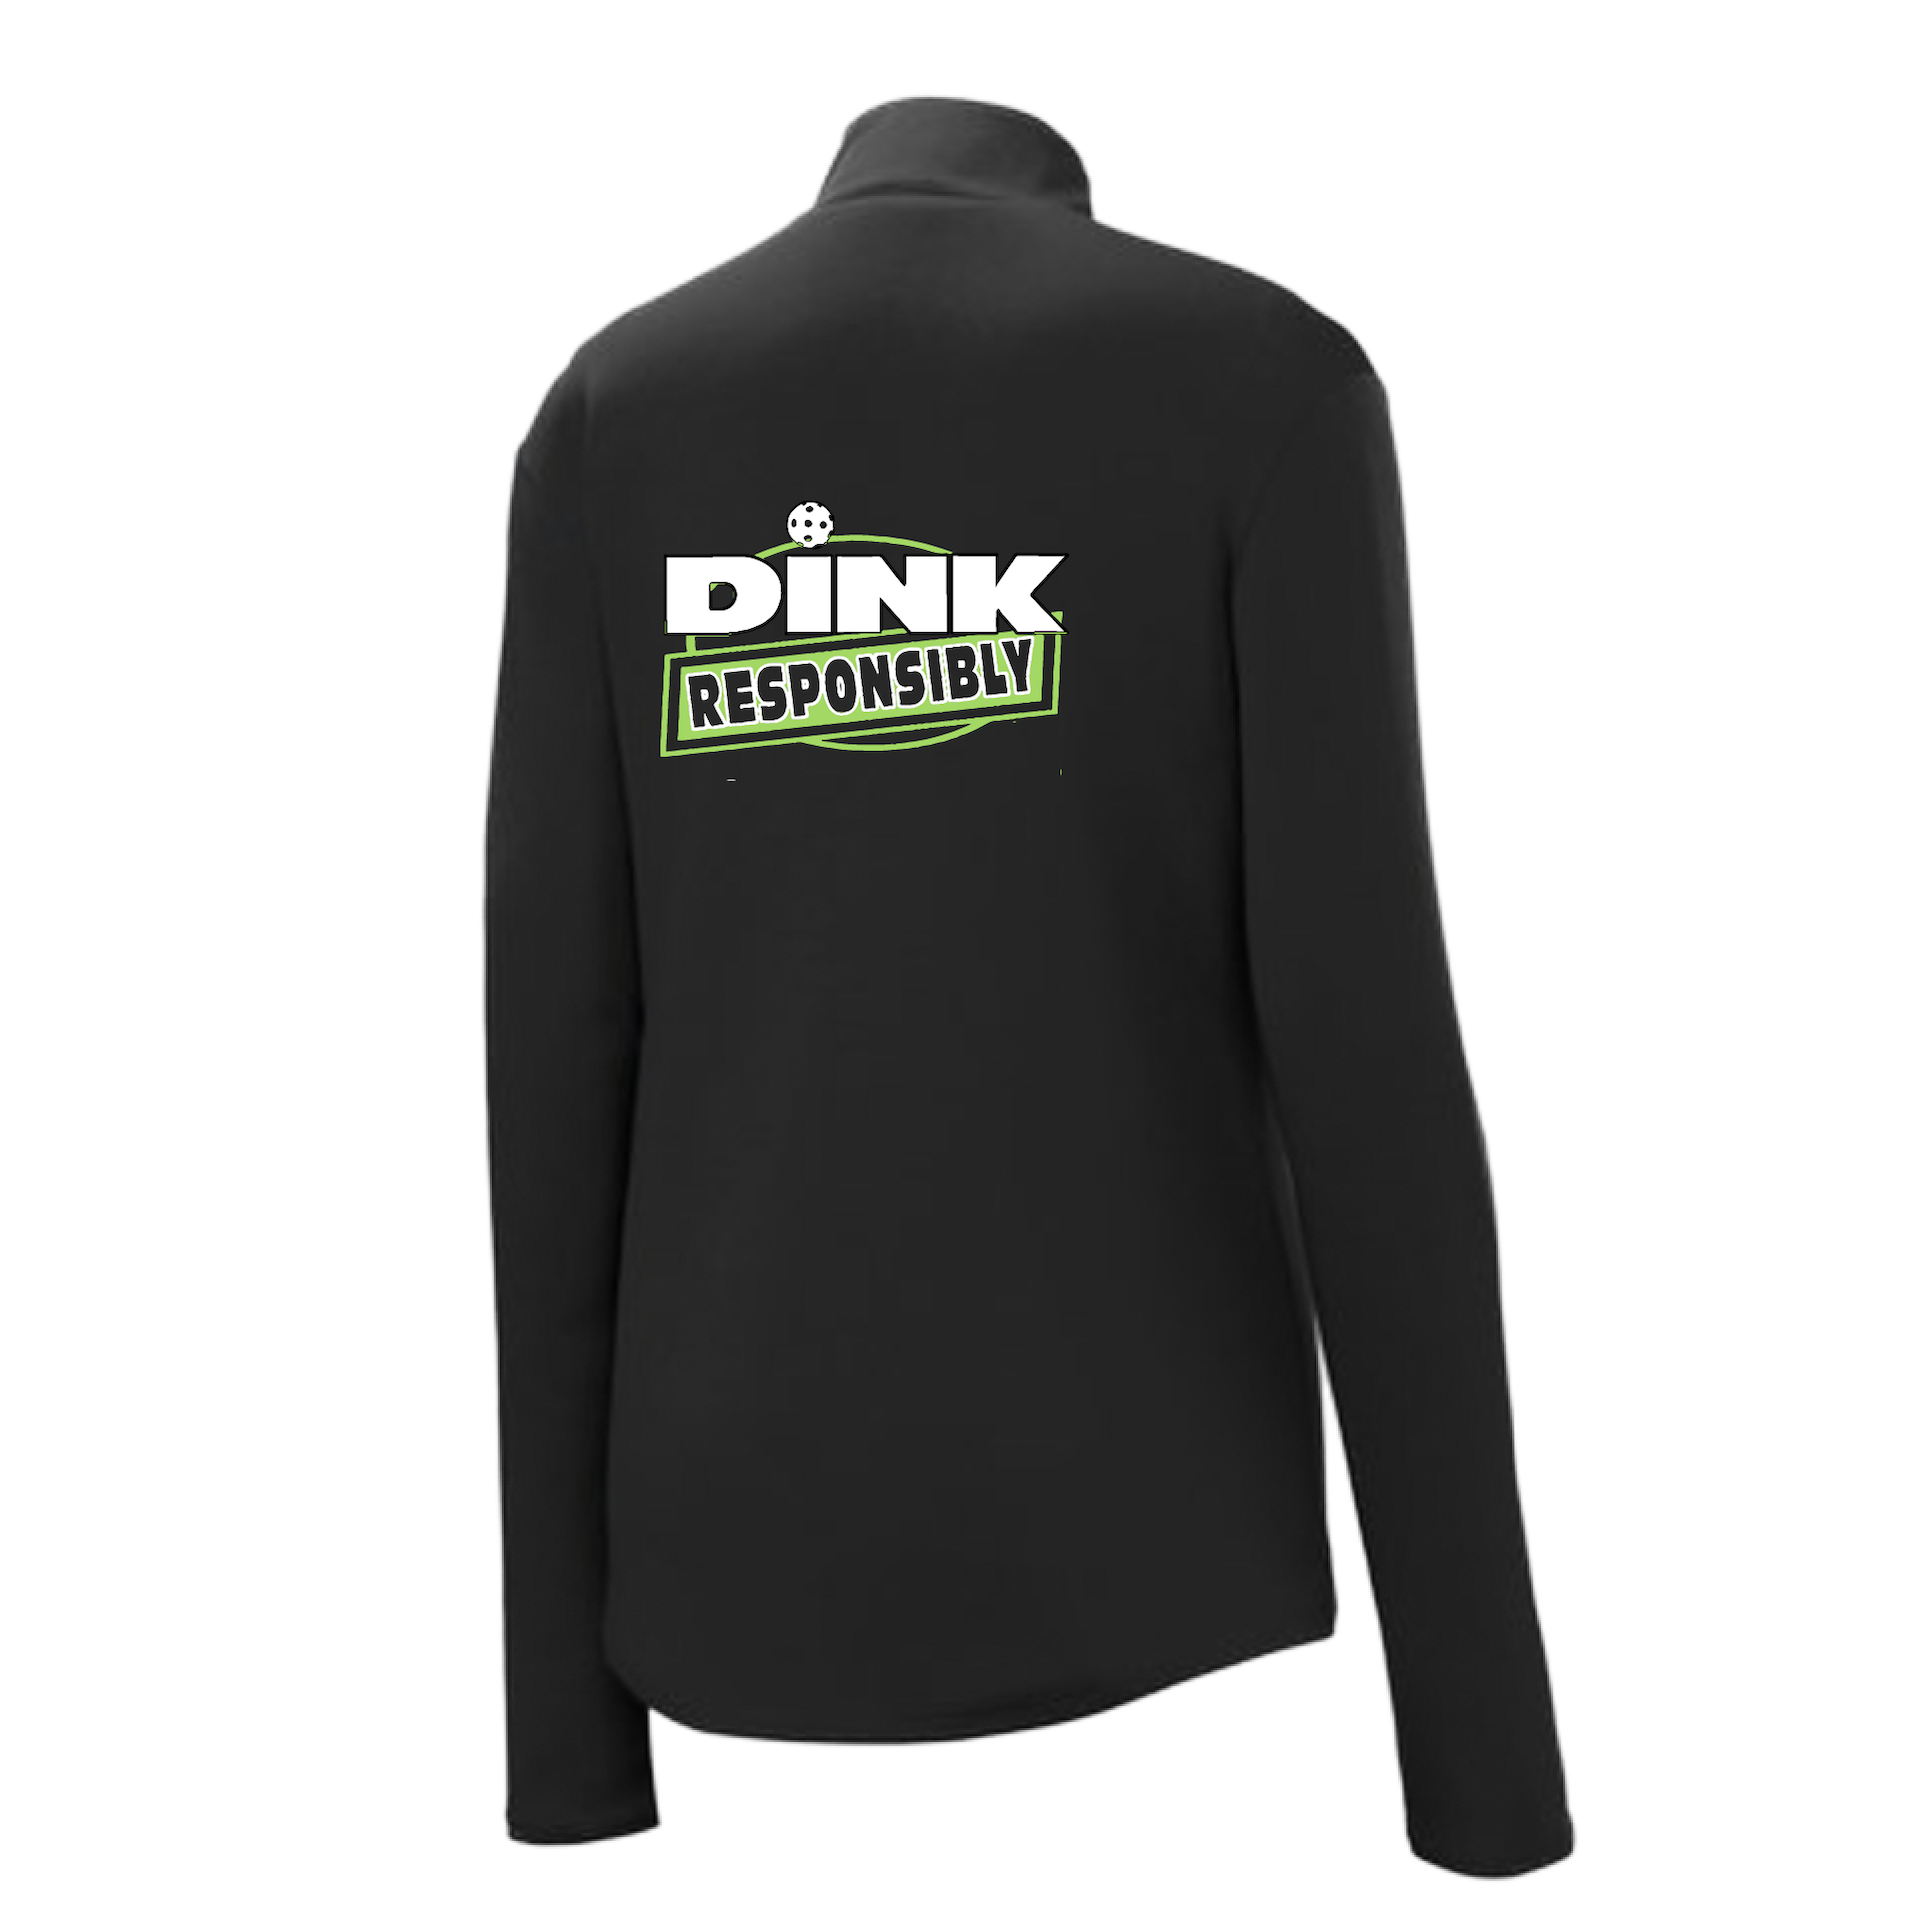 Pickleball Design: Dink Responsibly  Women's 1/4-Zip Pullover: Princess seams and Drop tail hem.  Turn up the volume in this Women's shirt with its perfect mix of softness and attitude. Material is ultra-comfortable with moisture wicking properties and tri-blend softness. PosiCharge technology locks in color. Highly breathable and lightweight. Versatile enough for wearing year-round.